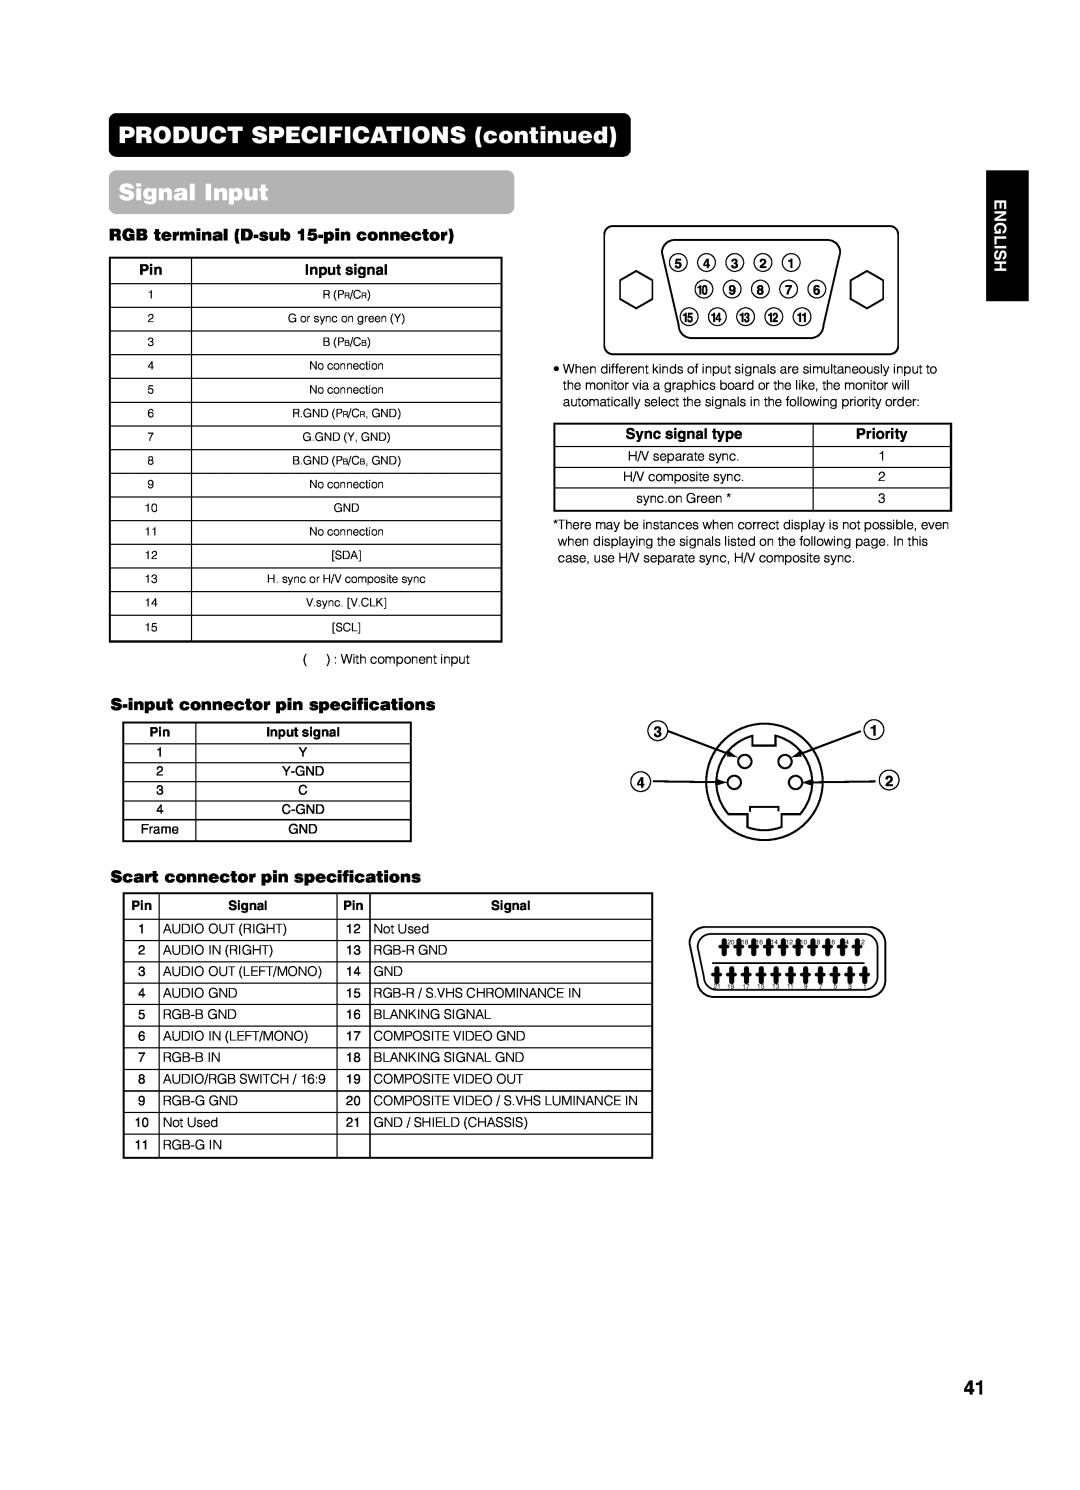 Yamaha PDM-4210E user manual PRODUCT SPECIFICATIONS continued Signal Input, RGB terminal D-sub 15-pin connector, English 